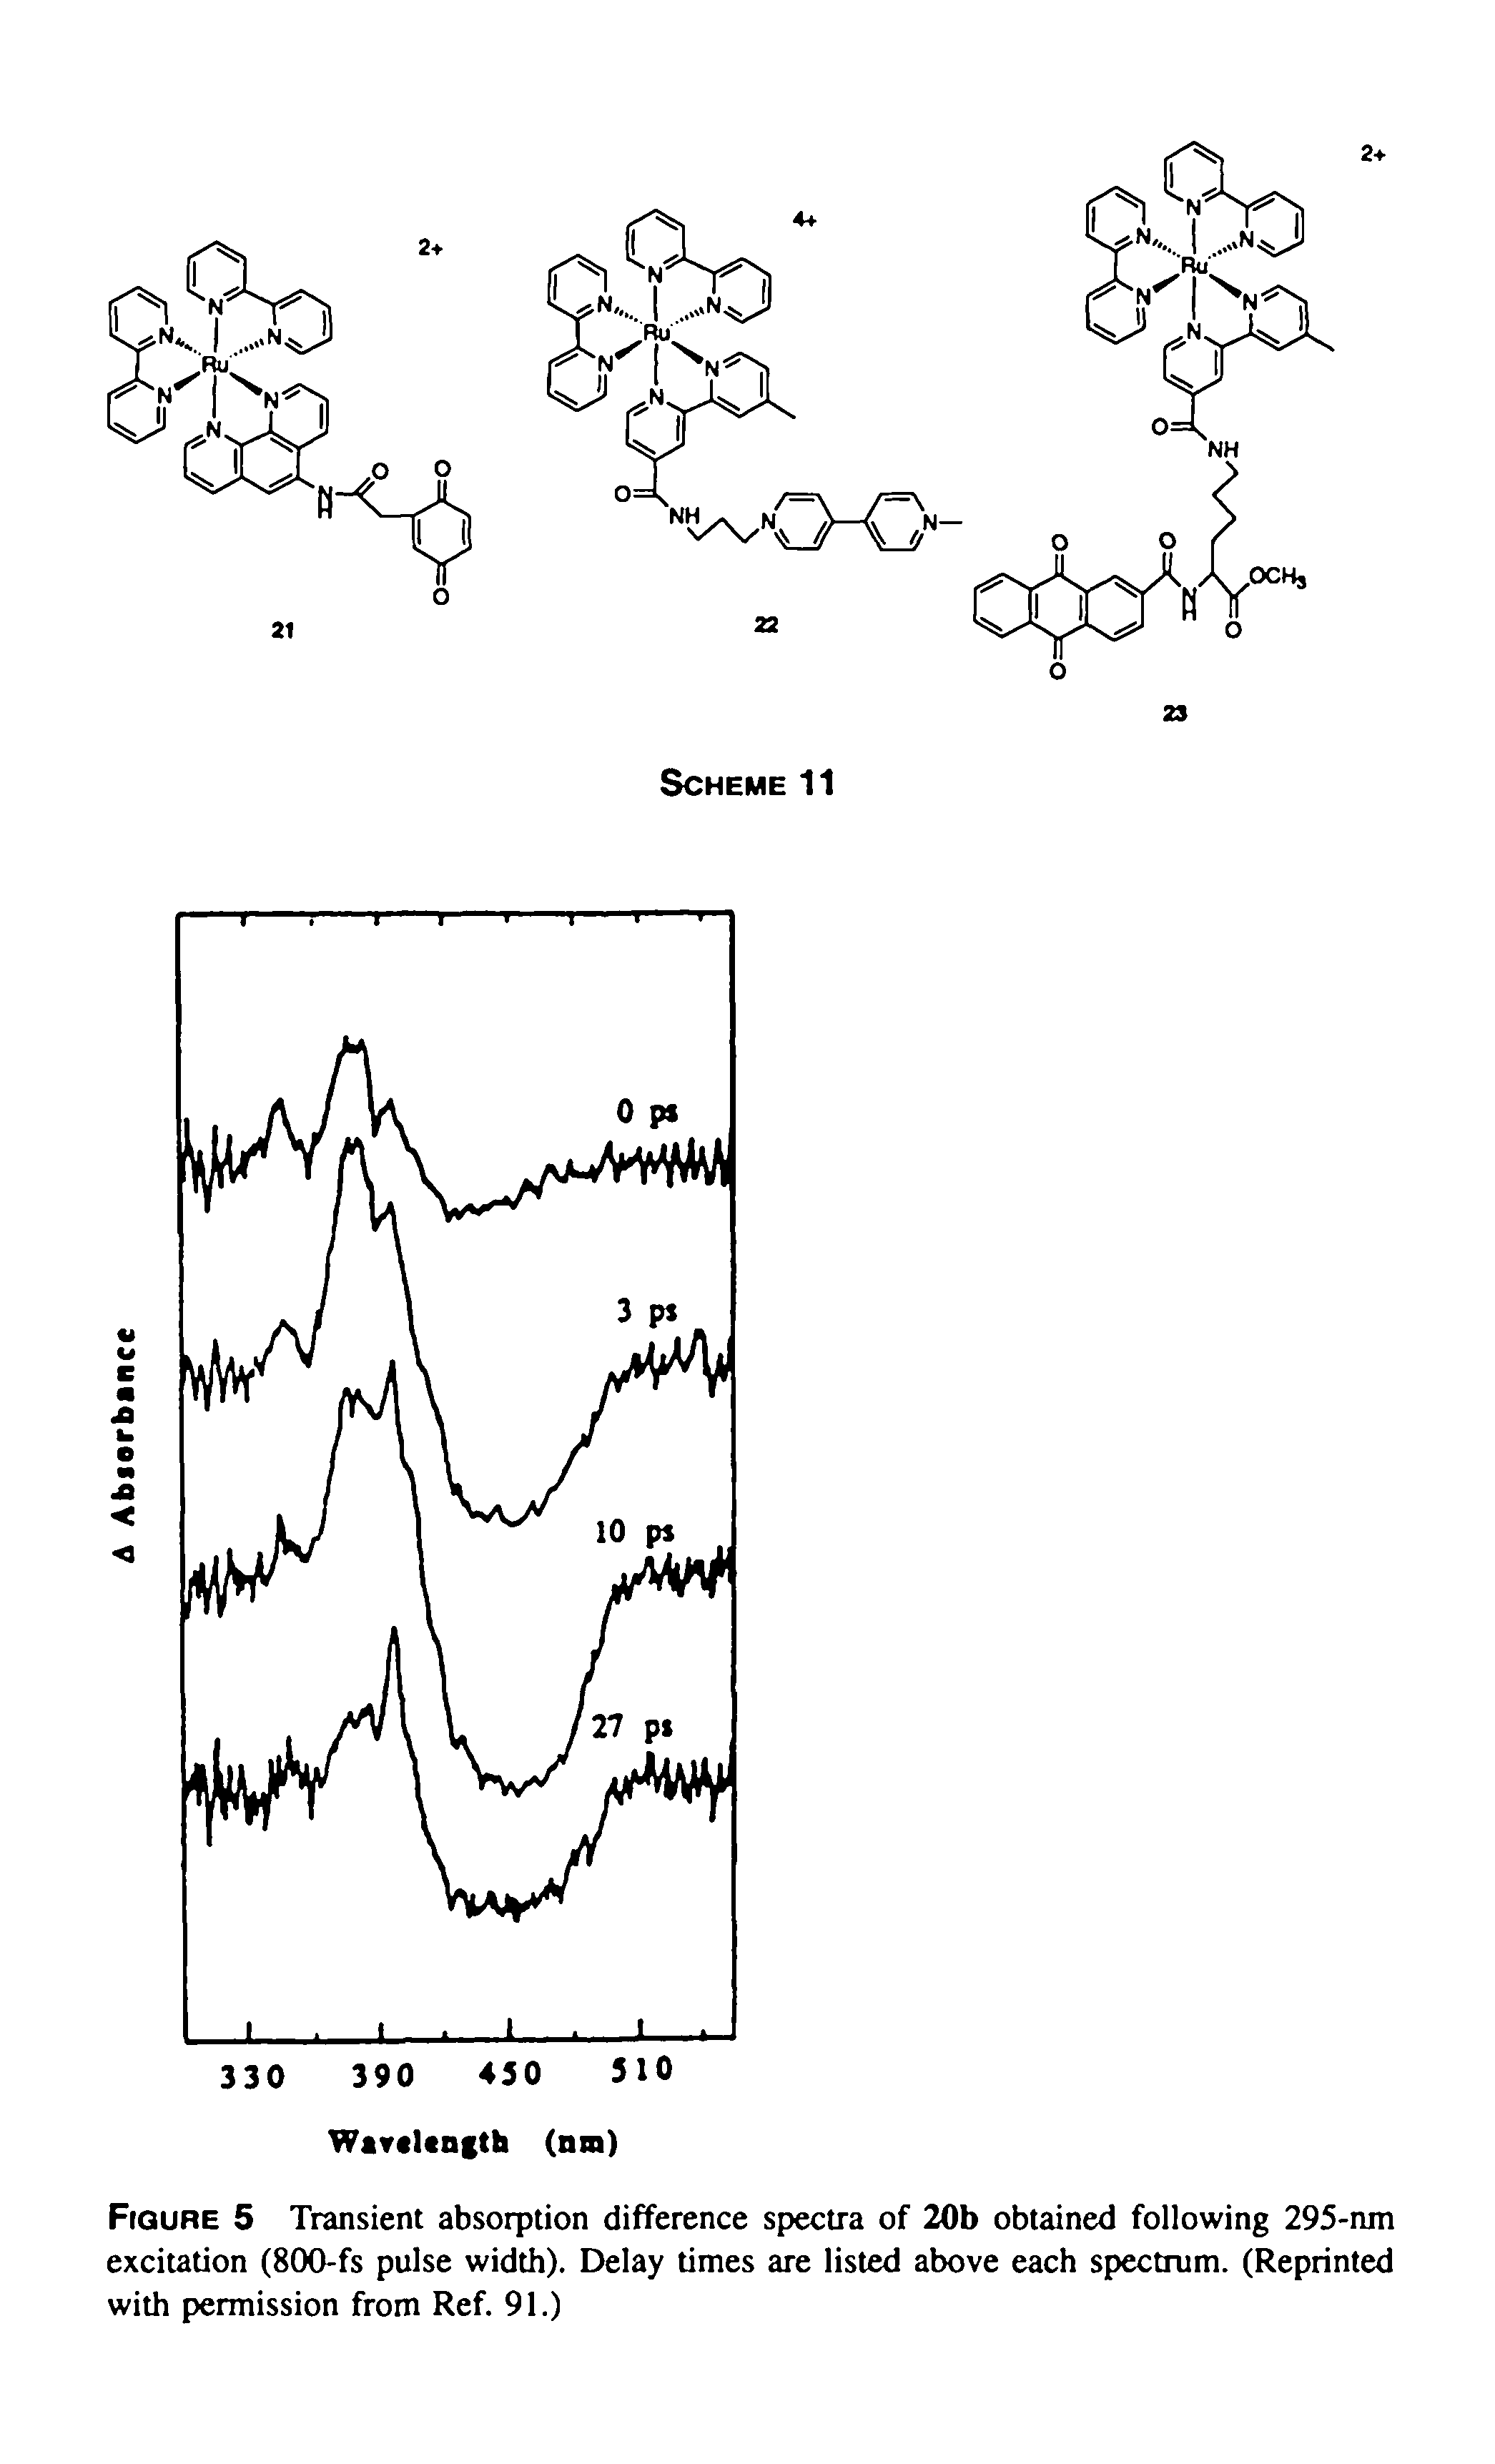 Figure 5 Transient absorption difference spectra of 20b obtained following 295-nm excitation (800-fs pulse width). Delay times are listed above each spectrum. (Reprinted with permission from Ref. 91.)...